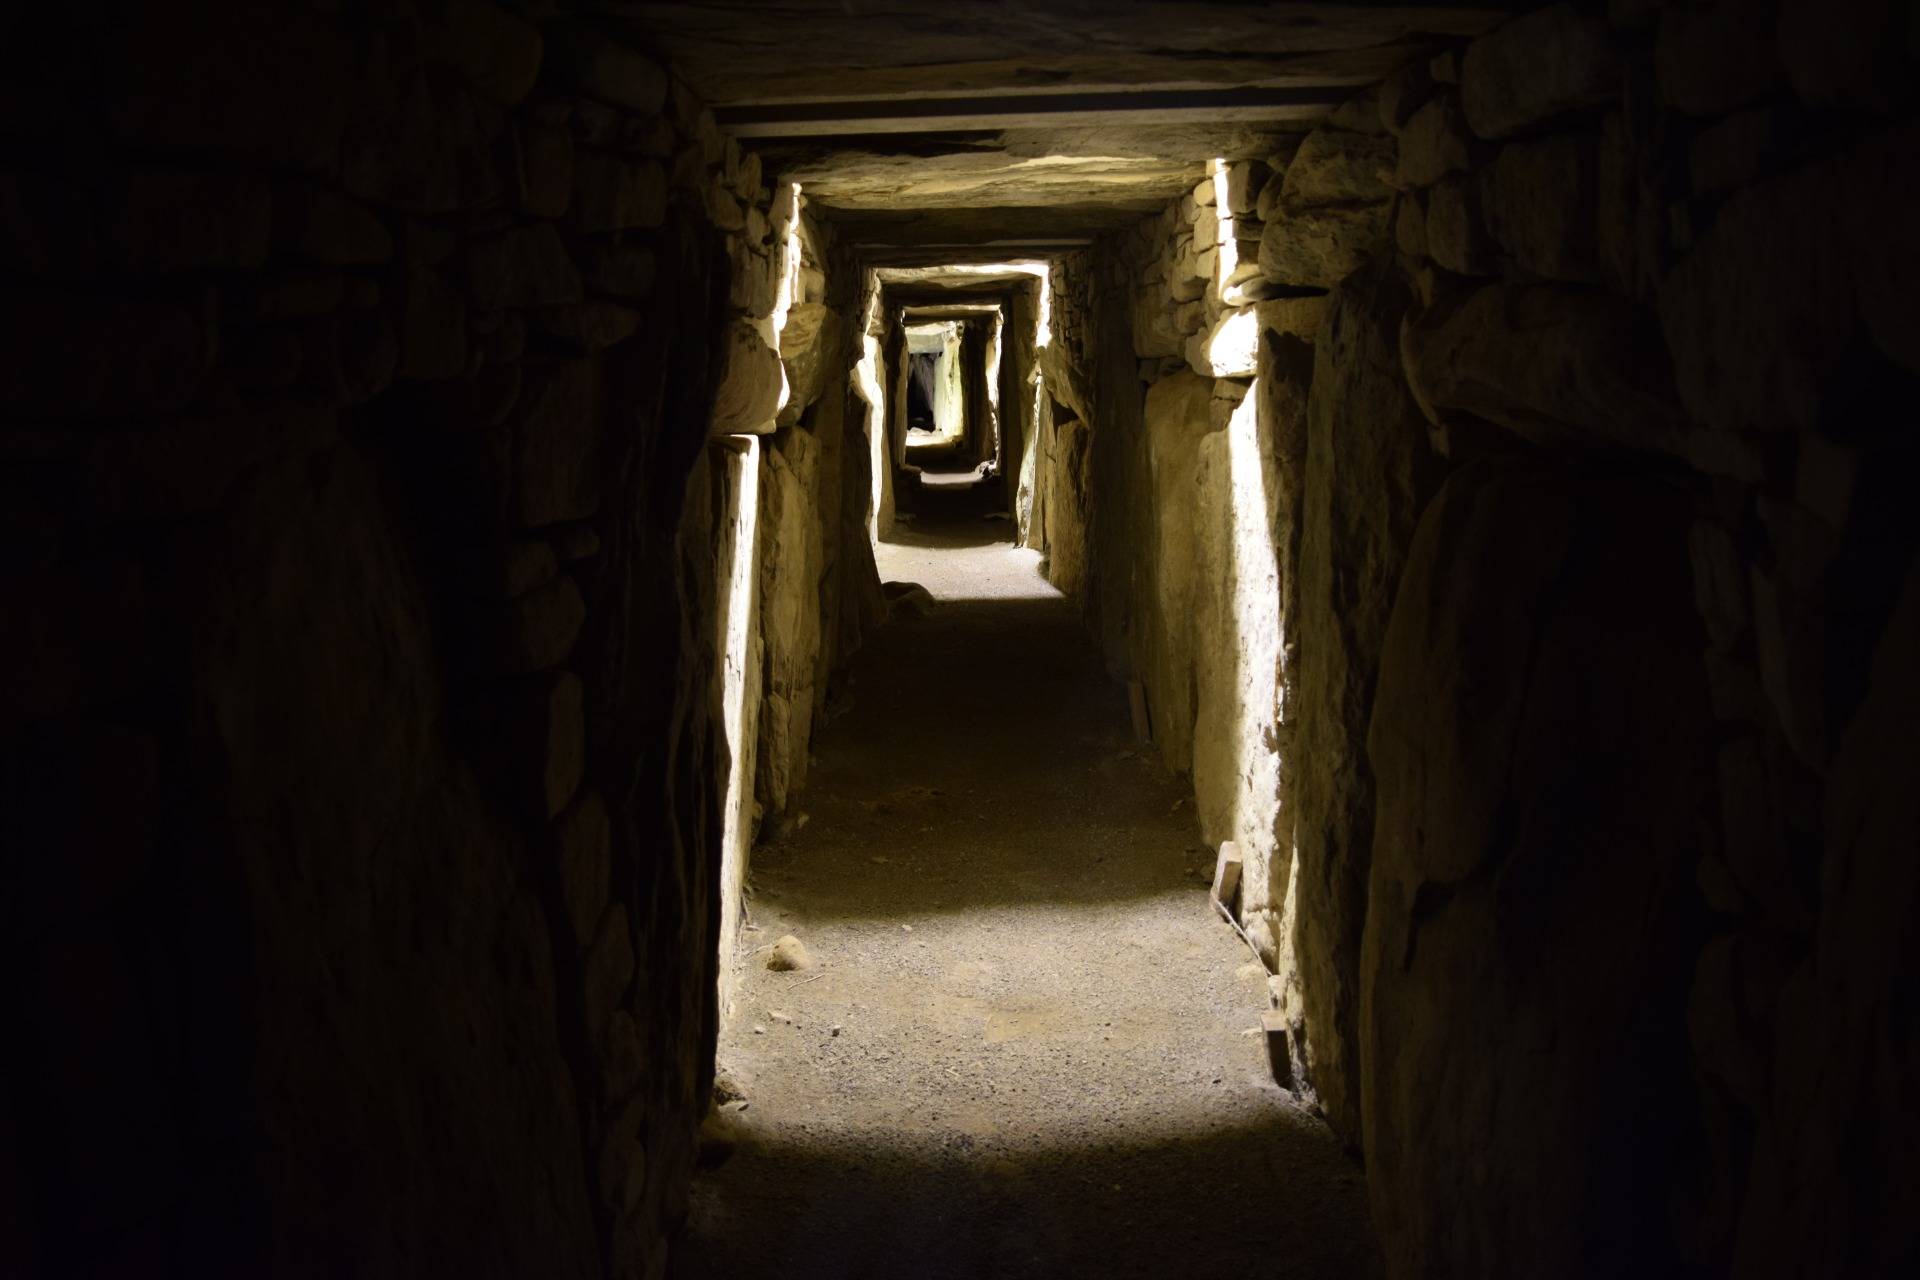 A peek inside one of the mounds at Knowth